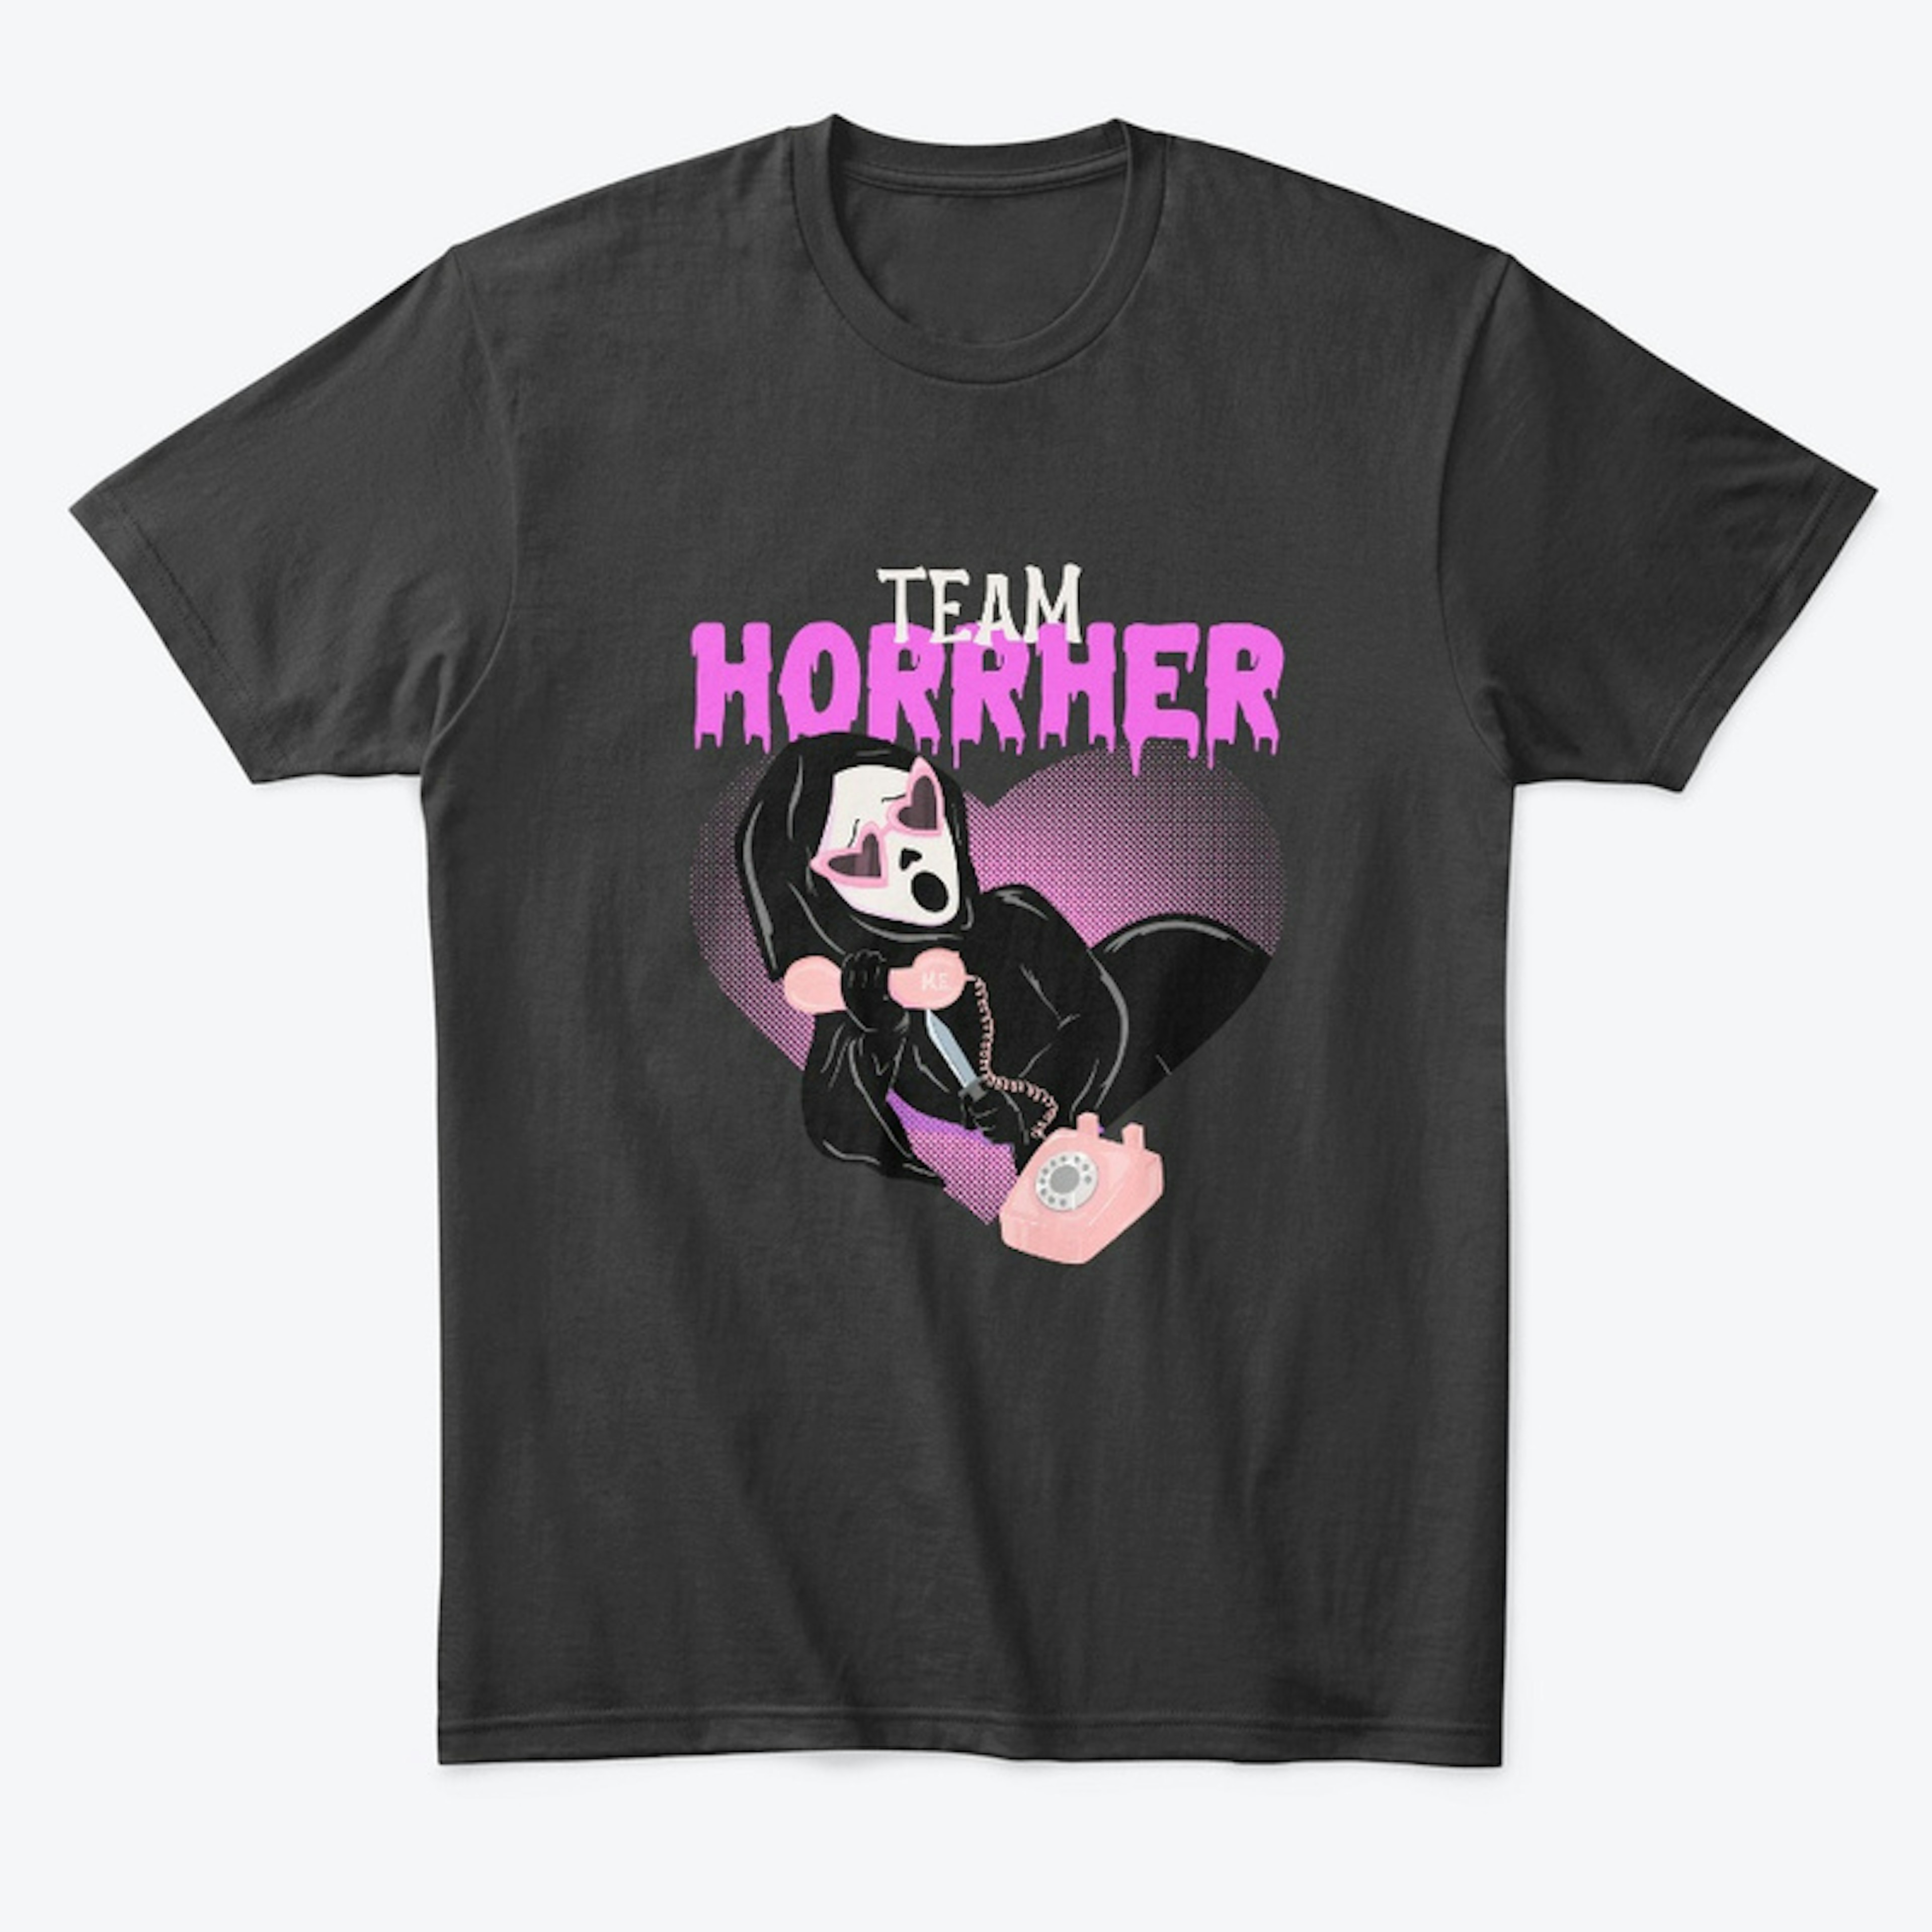 Team Horror Fall collection